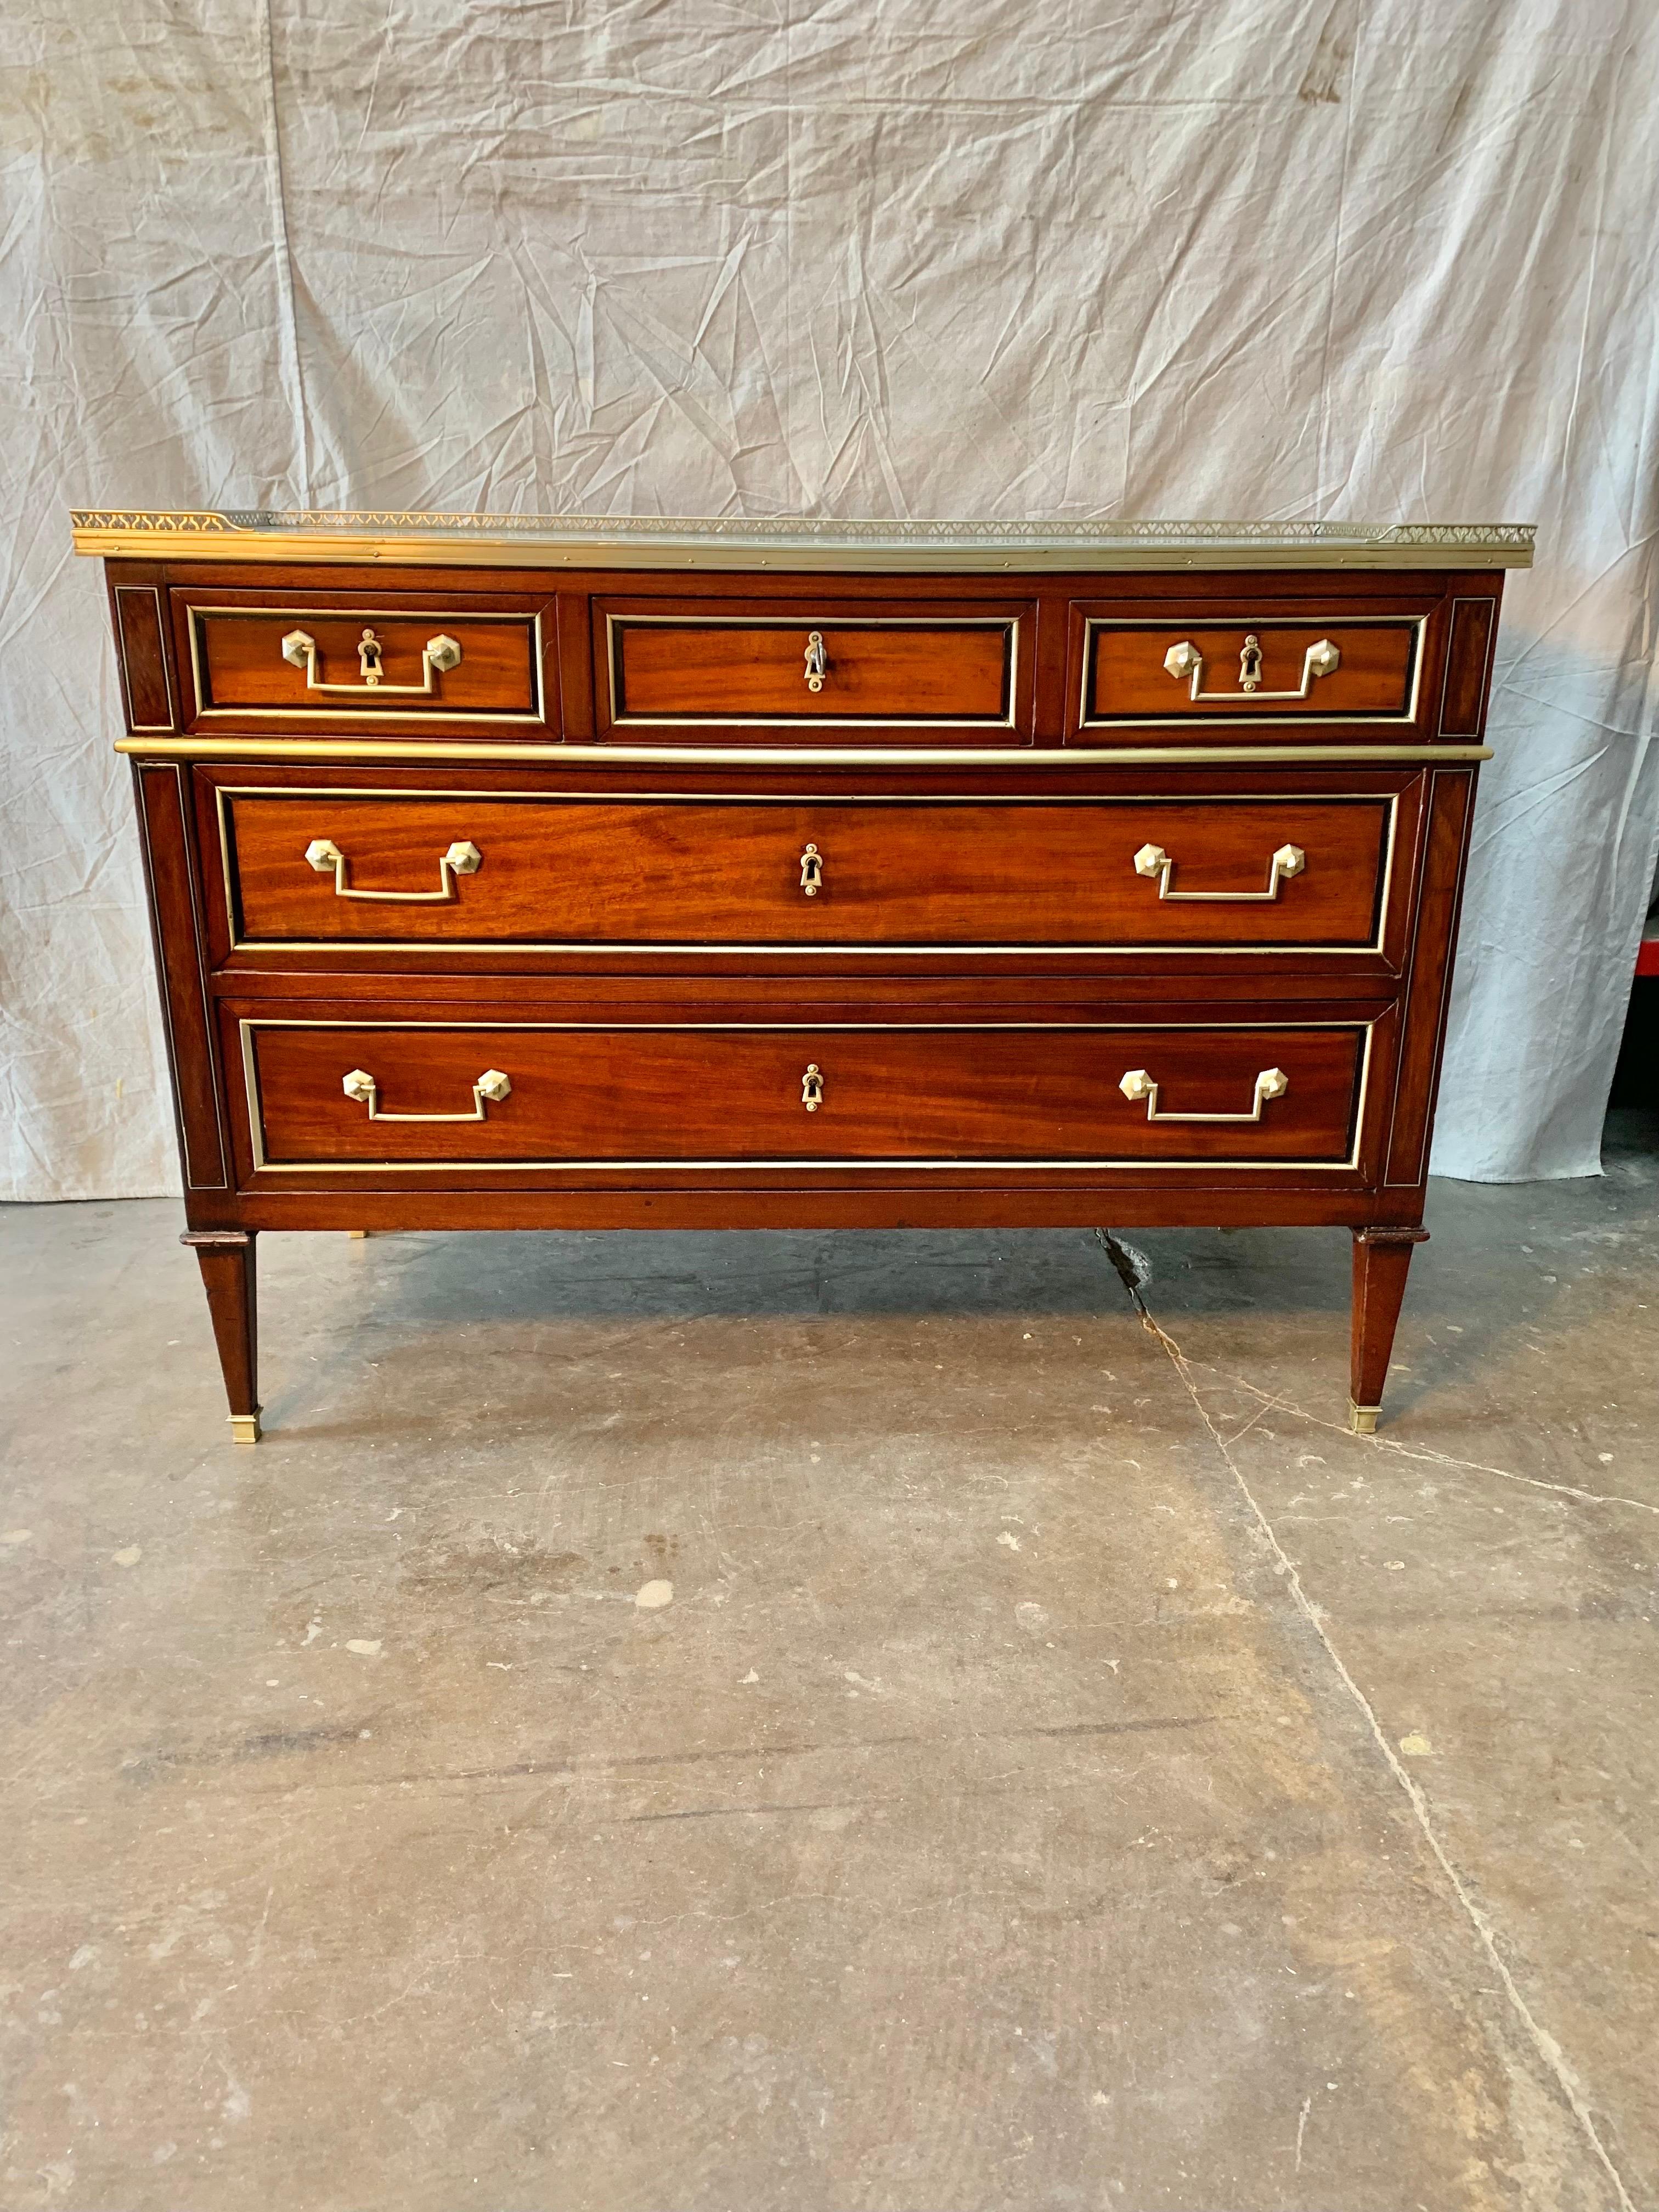 This 19th Century French Louis XVI Commode is made of mahogany and oak. The piece is crafted with a marble top and pierced brass gallery. Presented as found, repairs to the marble have been during the lifetime of the piece. The chest of drawers